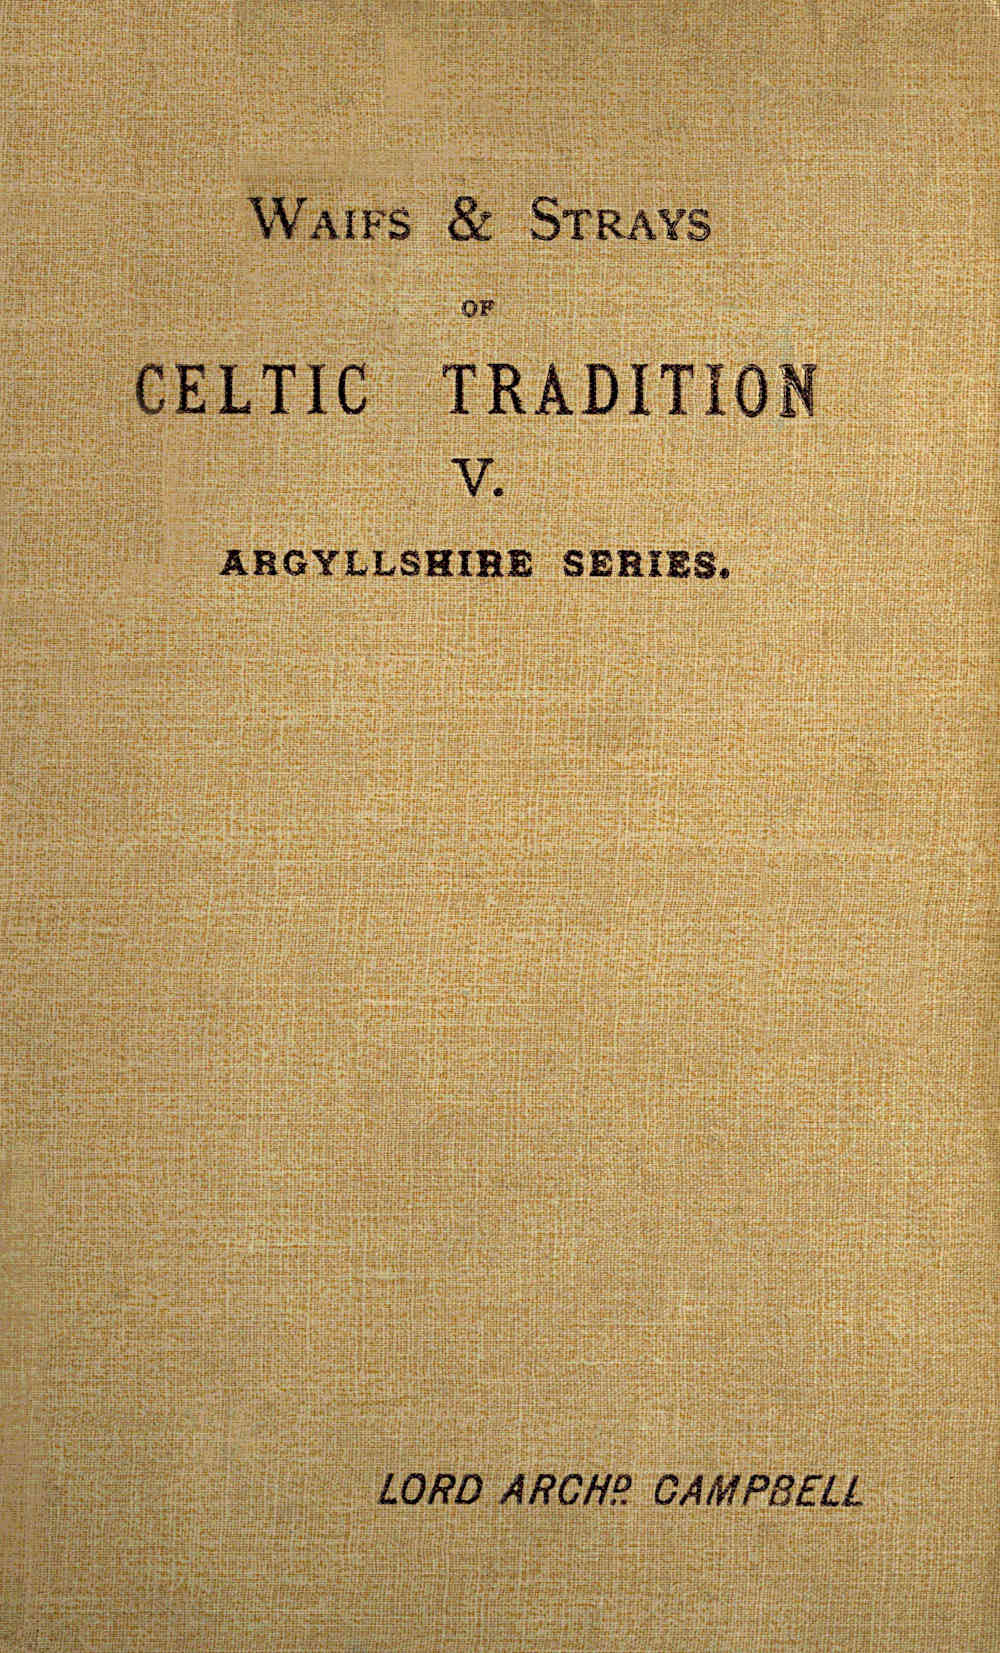 Clan Traditions and Popular Tales of the Western Highlands and Islands